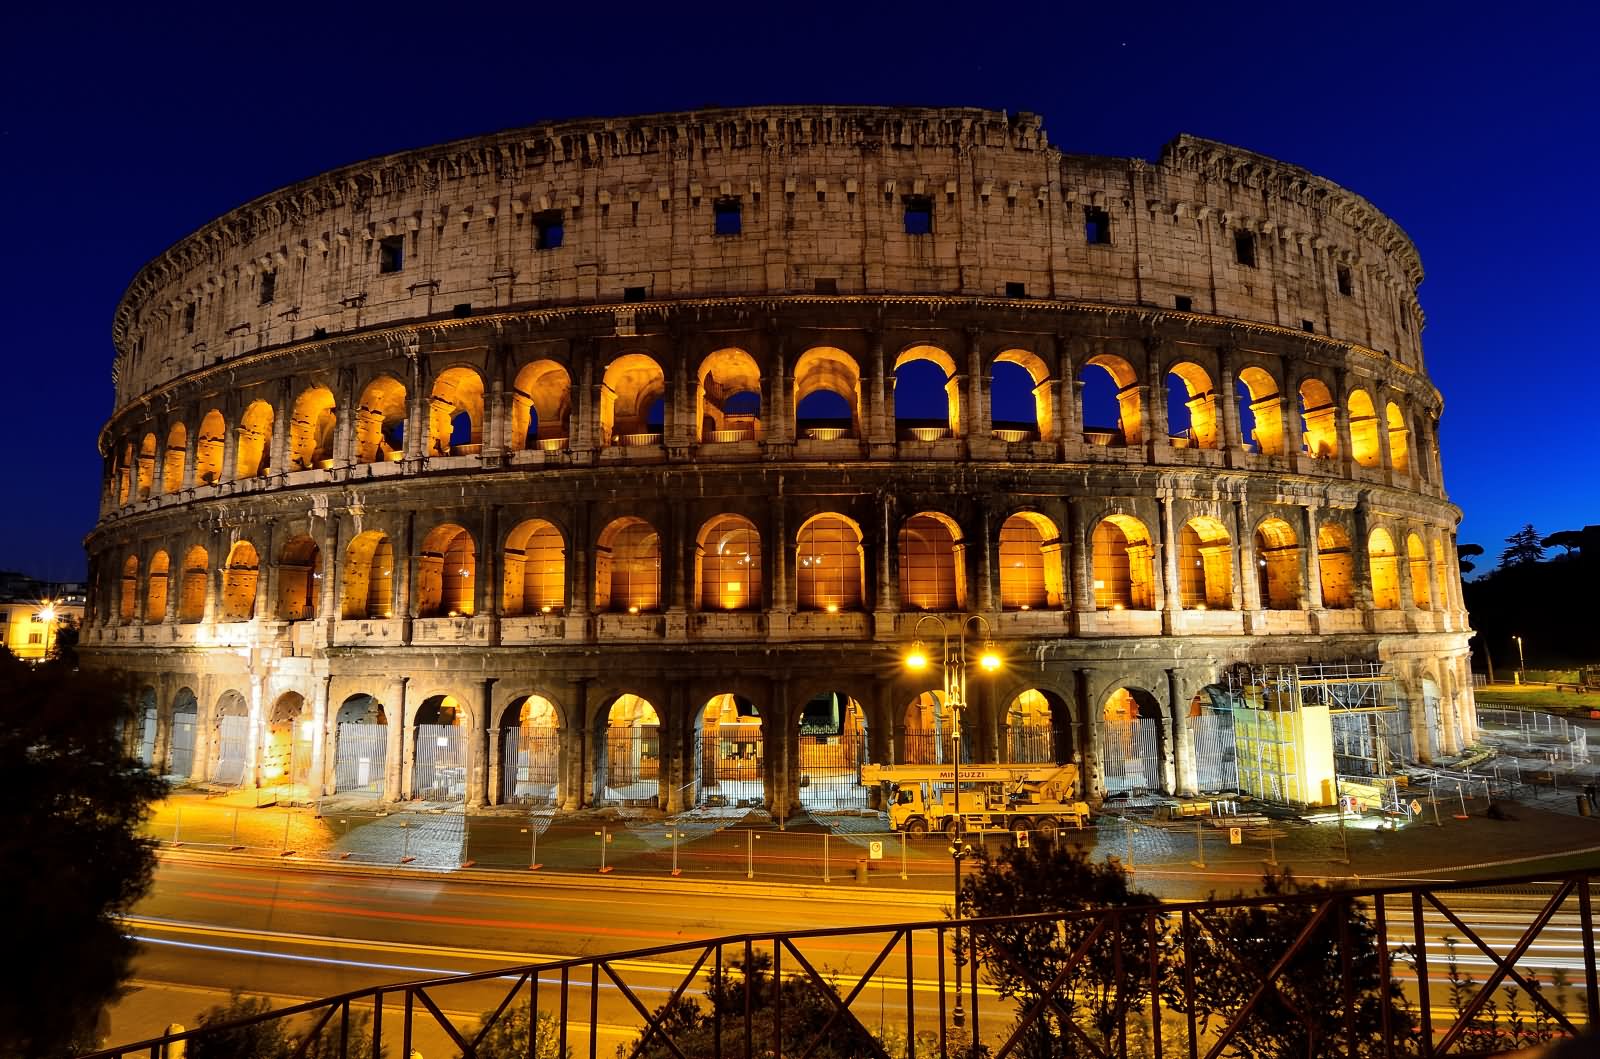 Night View Image Of The Colosseum